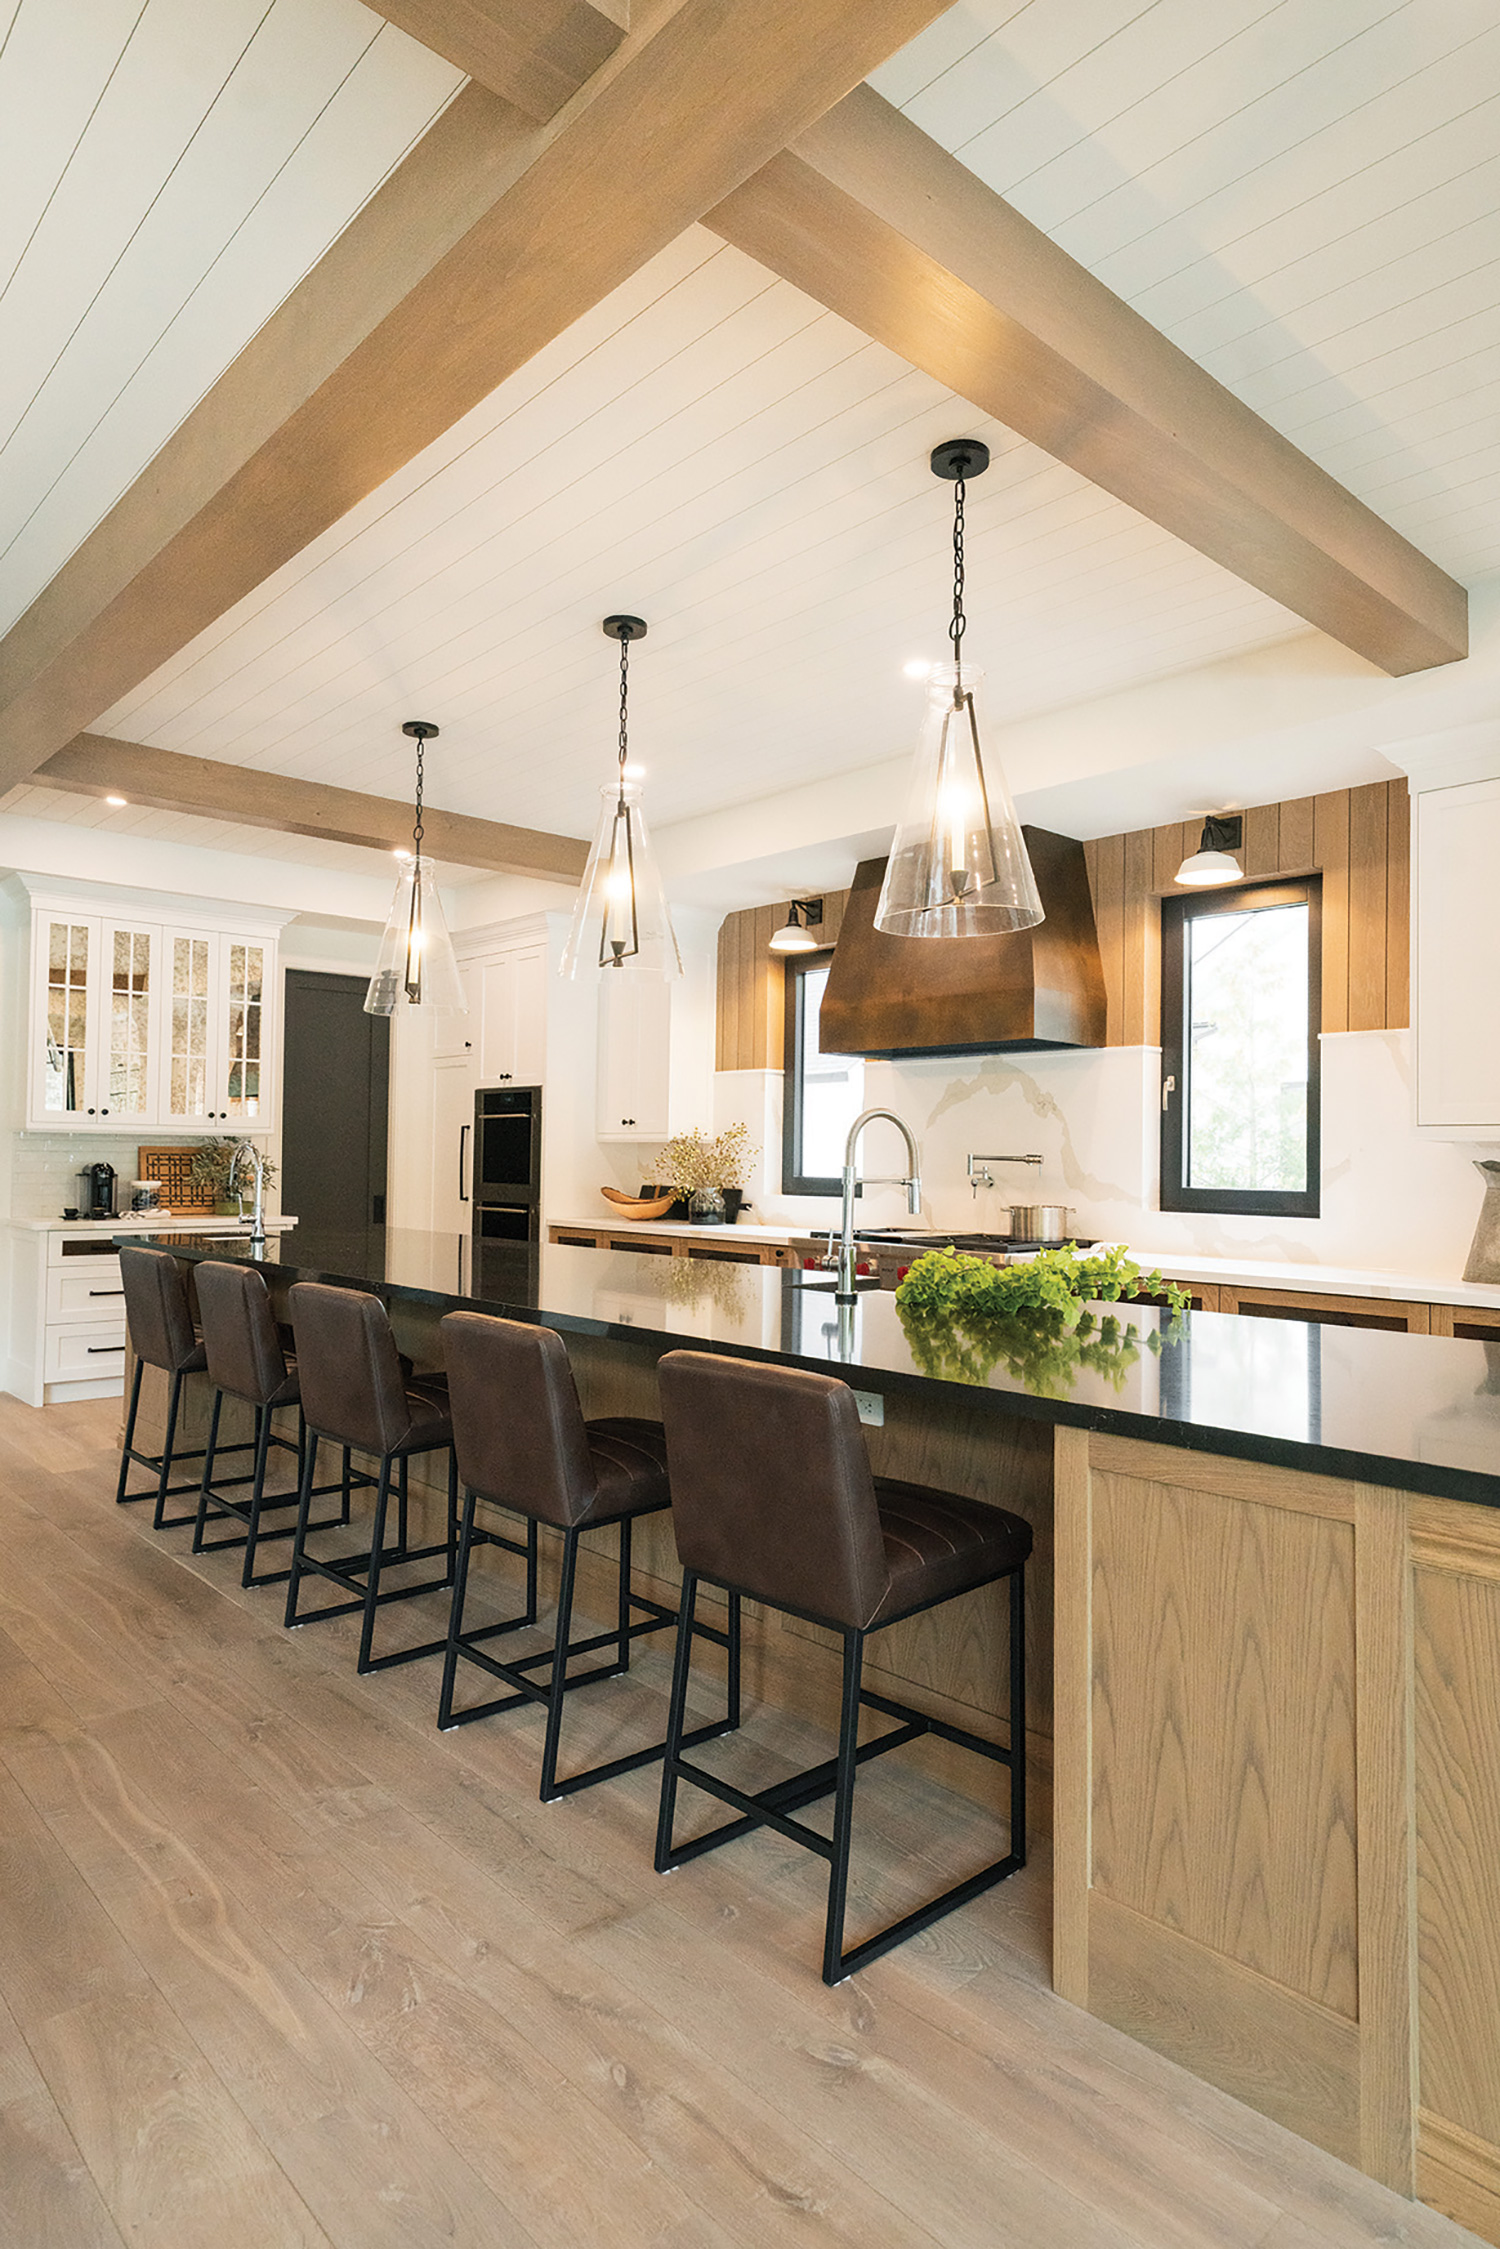 Barn beams, shiplap and honey-coloured wood add warmth to a chalet kitchen made for entertaining.